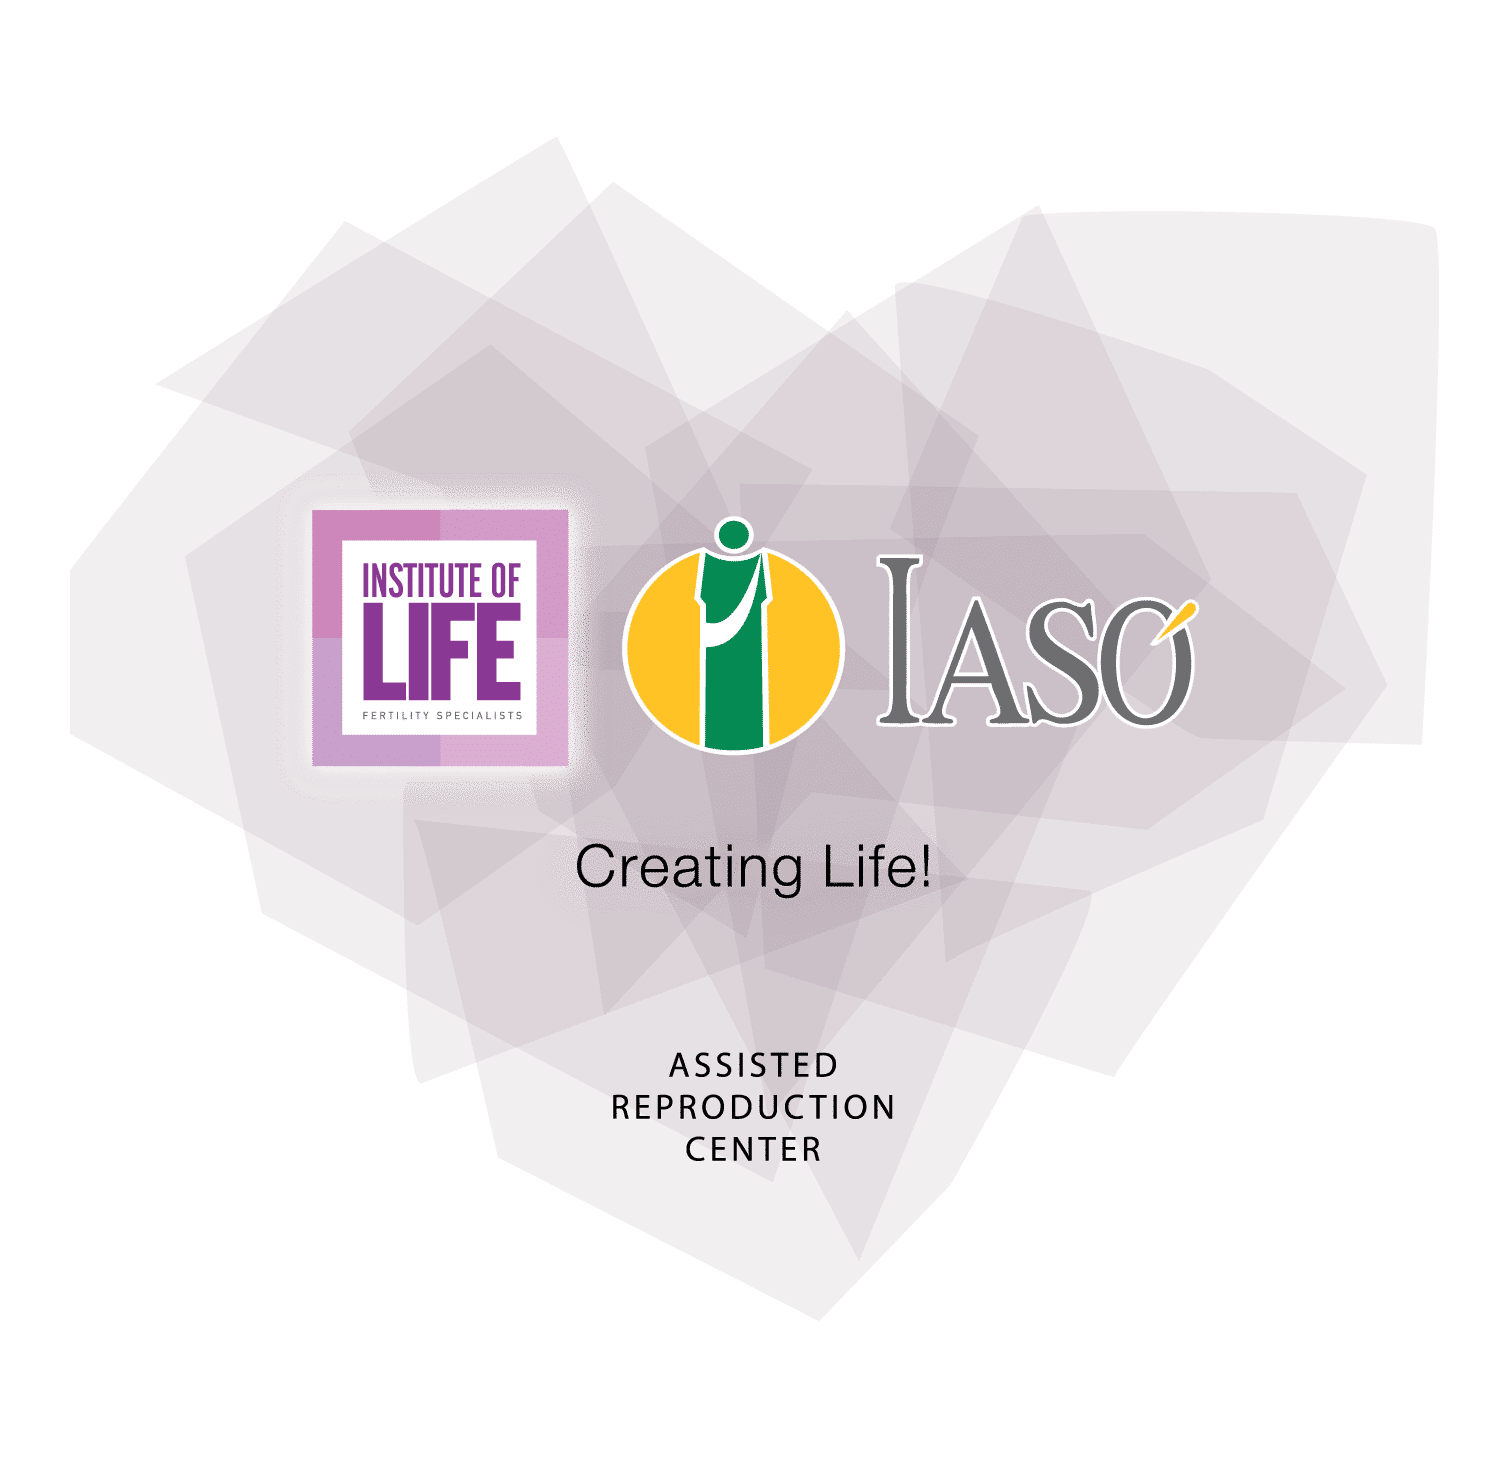 Heart Logo in English IASO Institute of Life Creating Life Assisted Reproduction Center